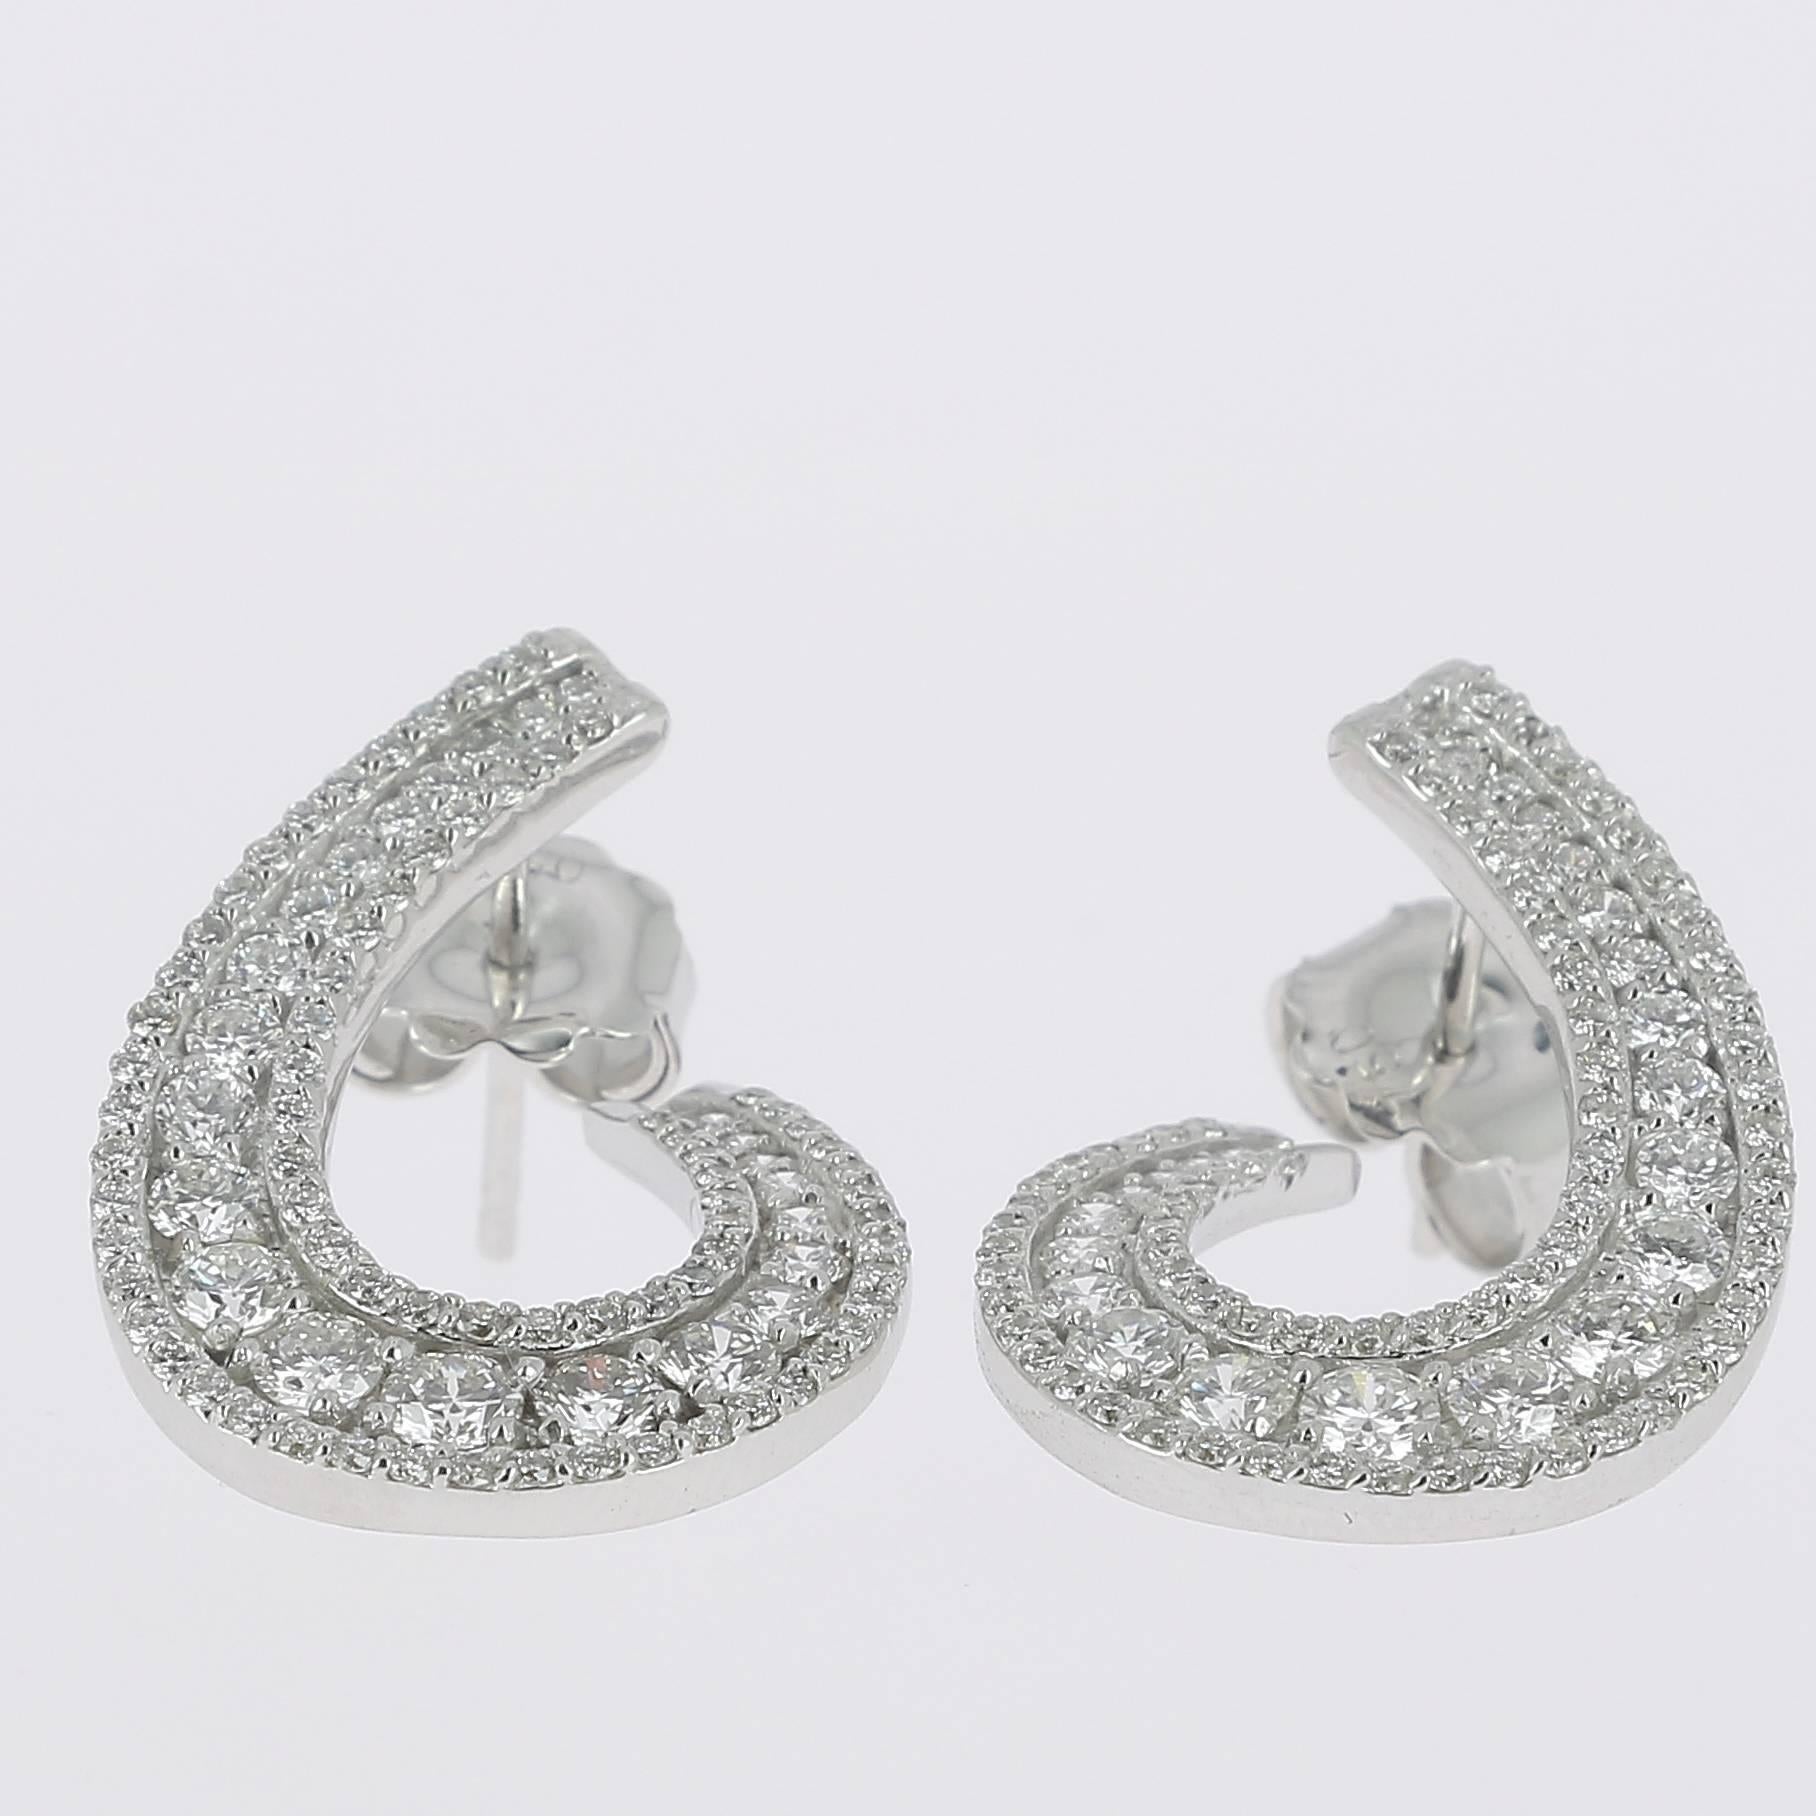 The Swirl Earrings are set with 3 Rows of White Diamonds.
The Diamond weight is 1.97 Carats.
All Diamonds are GVS qualities.
The earrings have Clip Closing security.
The Earrings are 18K White Gold.
Also available in 18 Karat Rose Gold and 18K